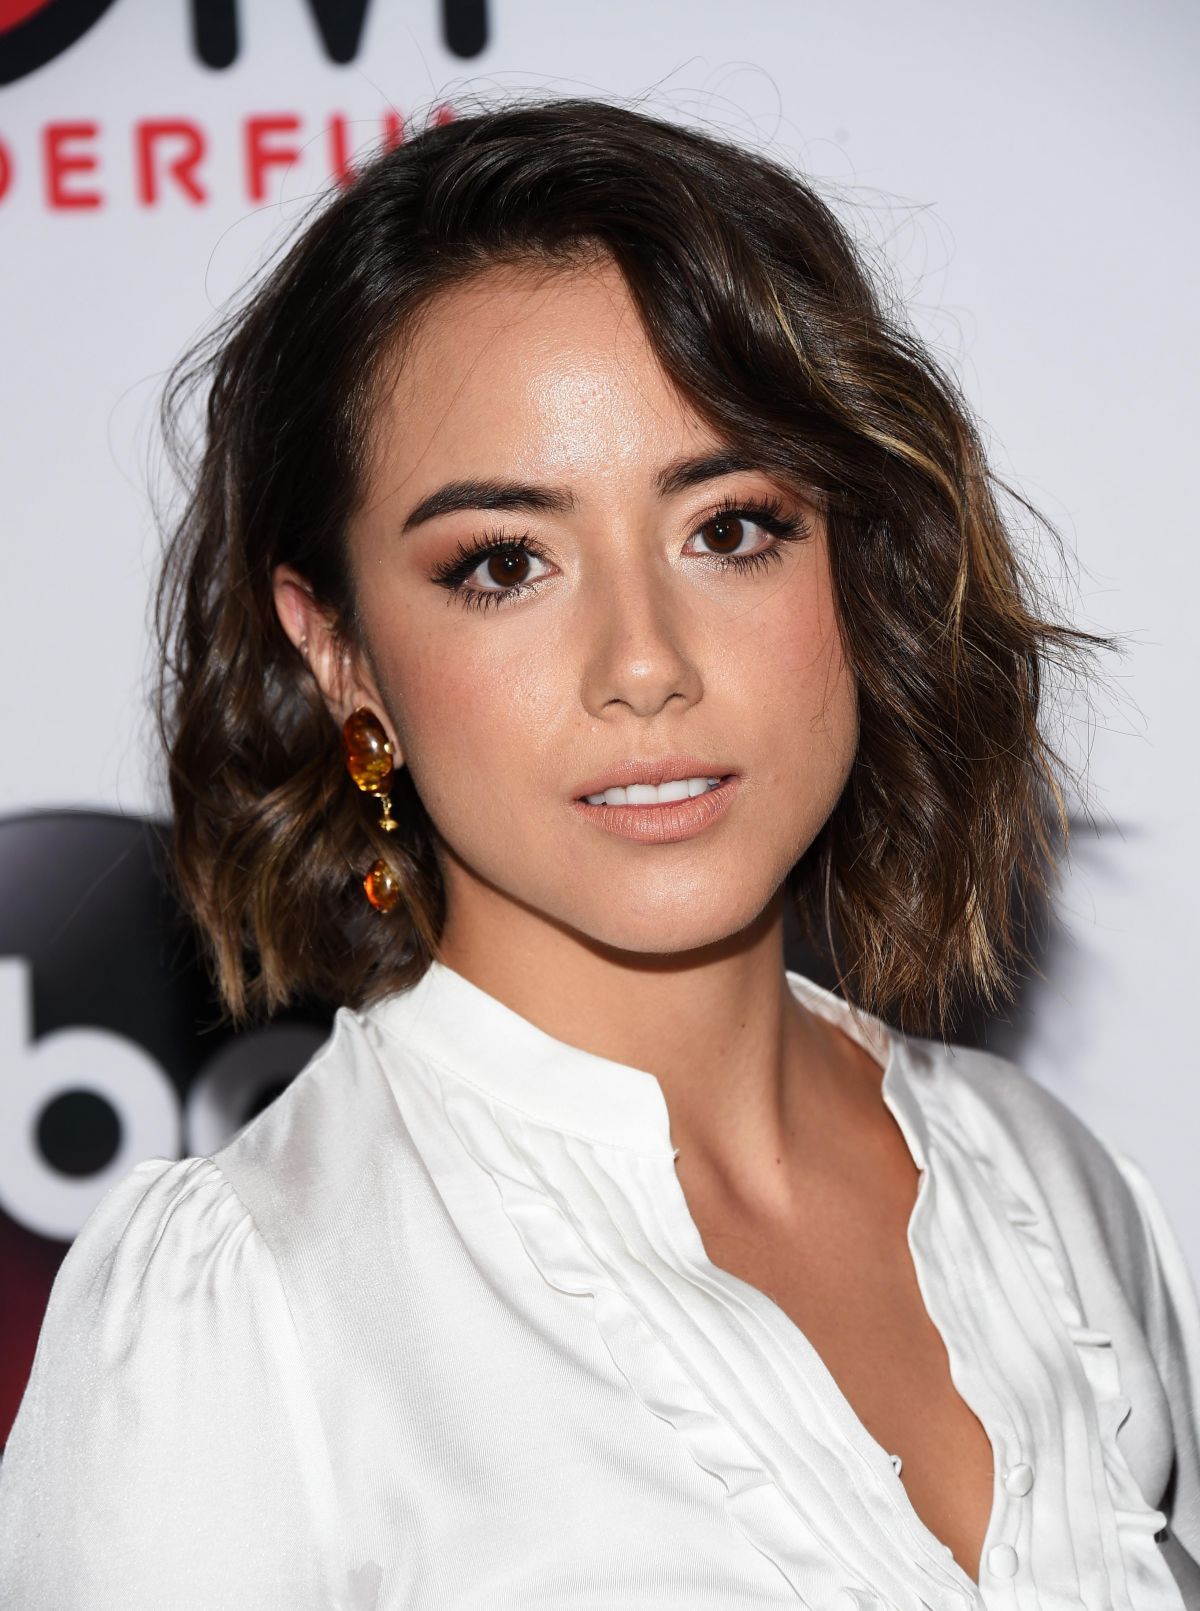 Chloe Bennet Wallpapers Hd Collection For Free Download - Marvel Agents Of Shield Picture Of Chloe Bennet , HD Wallpaper & Backgrounds